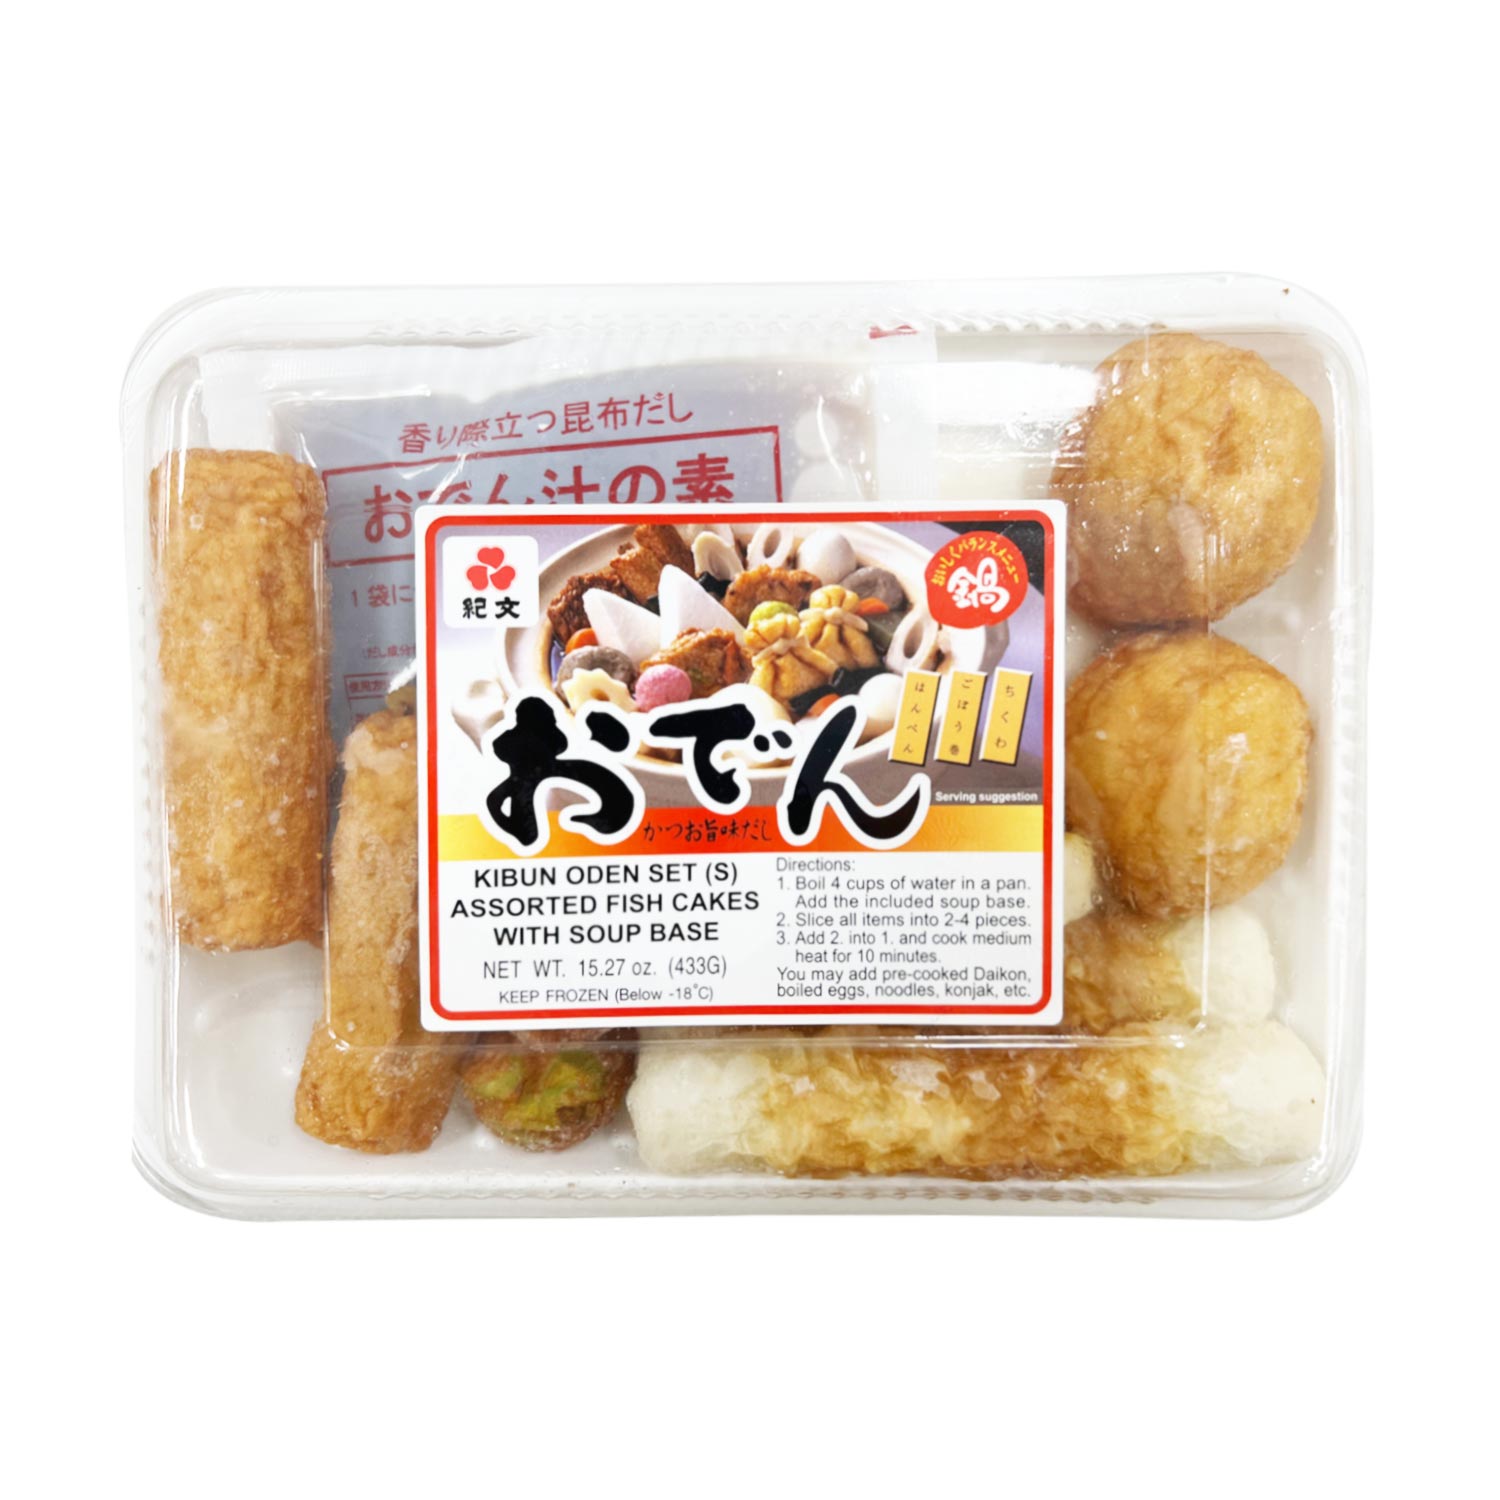 Kibun Oden Set Assorted Fish Cakes With Soup Base 433g-eBest-BBQ & Hotpot,Frozen food